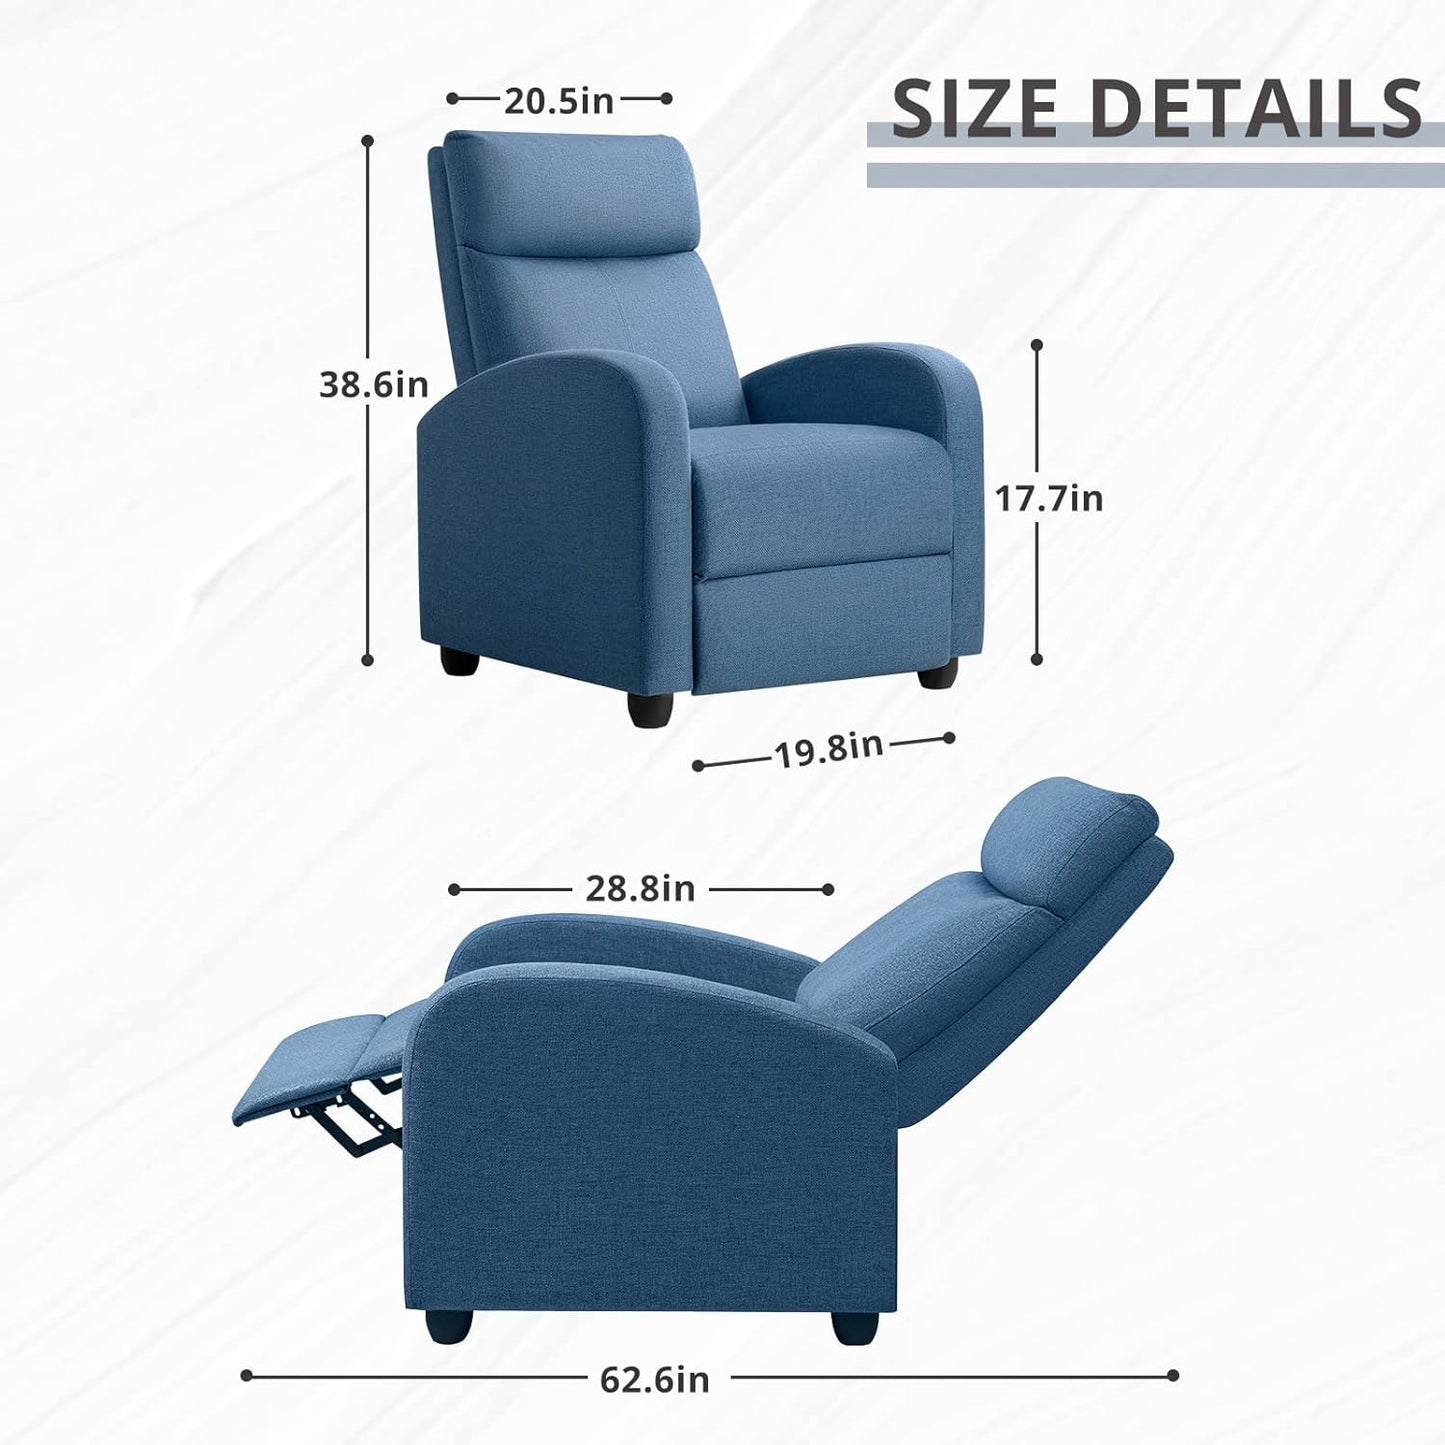 Recliner Chair Adjustable Home Theater Single Fabric Recliner Sofa Furniture with Thick Seat Cushion and Backrest Modern Living Room Recliners (Light-Blue)